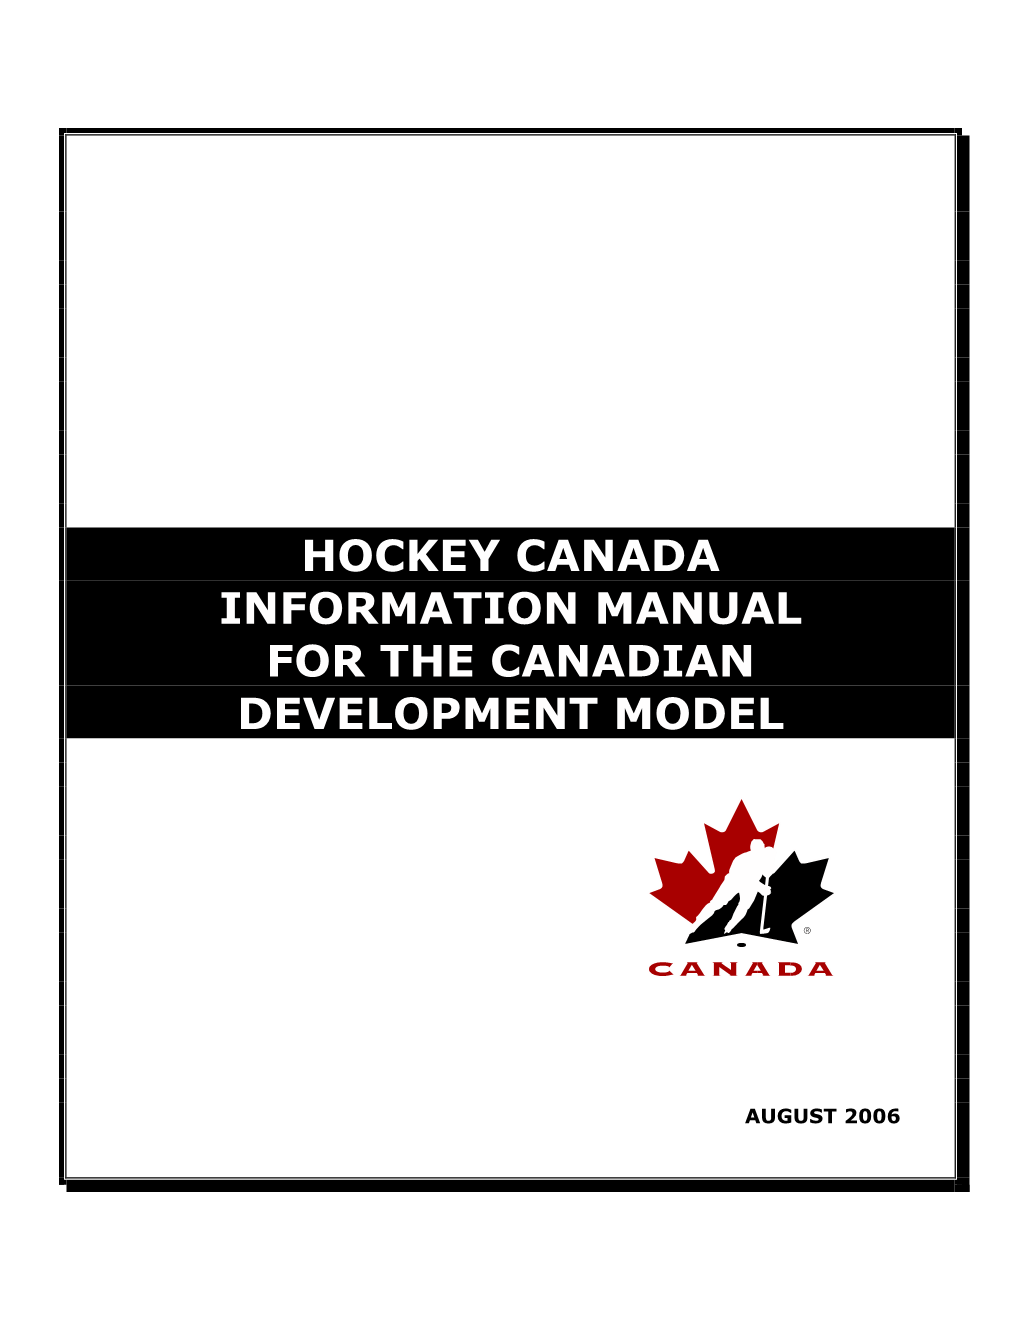 Hockey Canada Information Manual for the Canadian Development Model